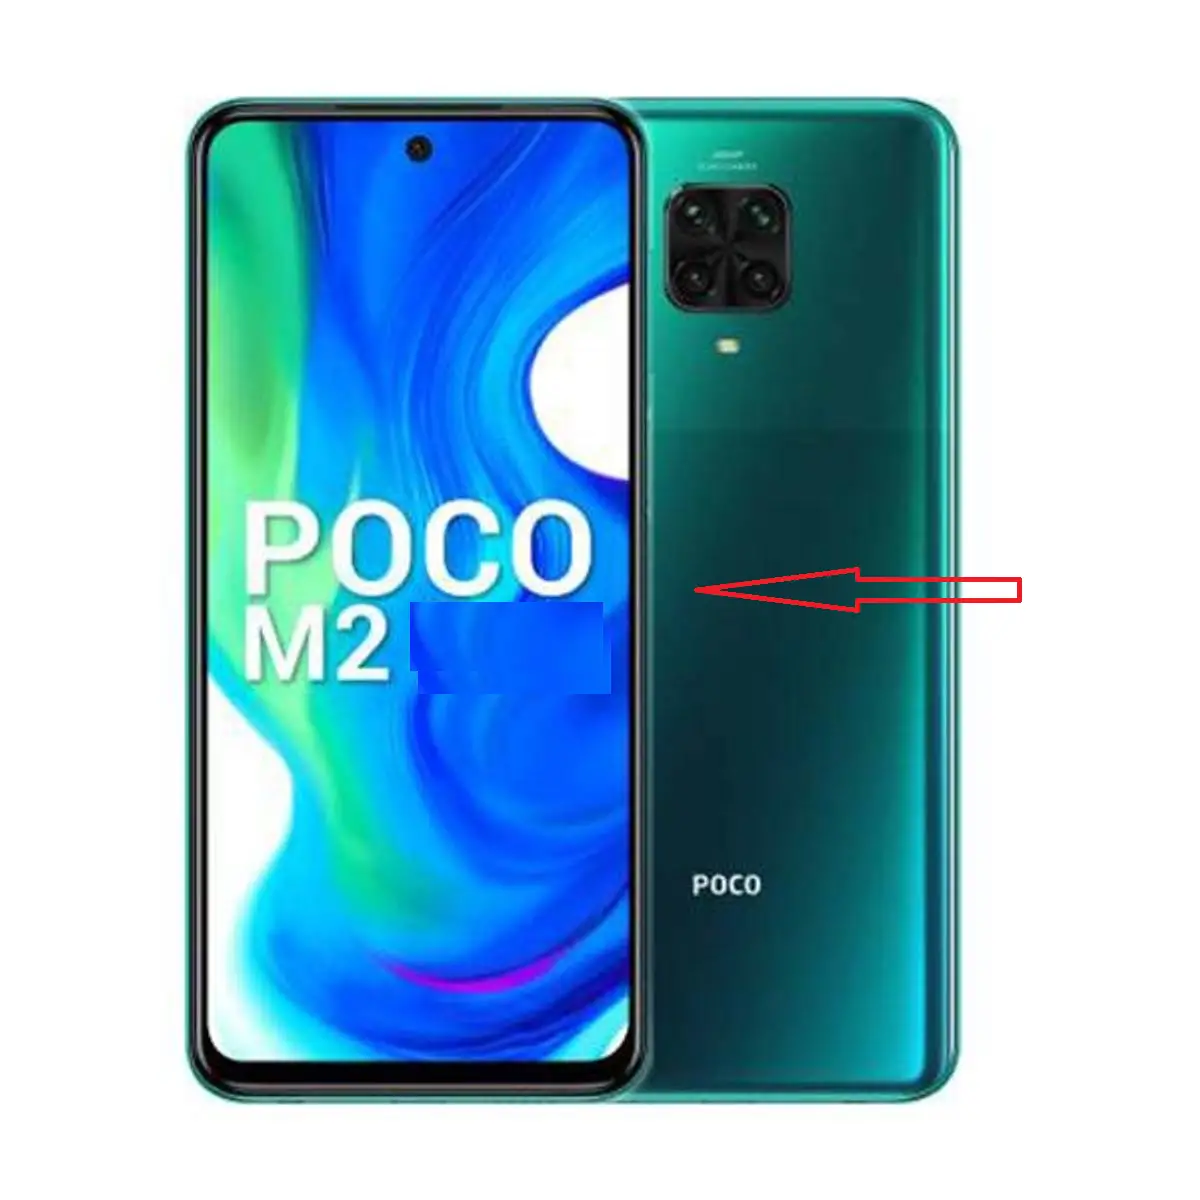 How to Hard Reset Poco M2 Mobile Phone?